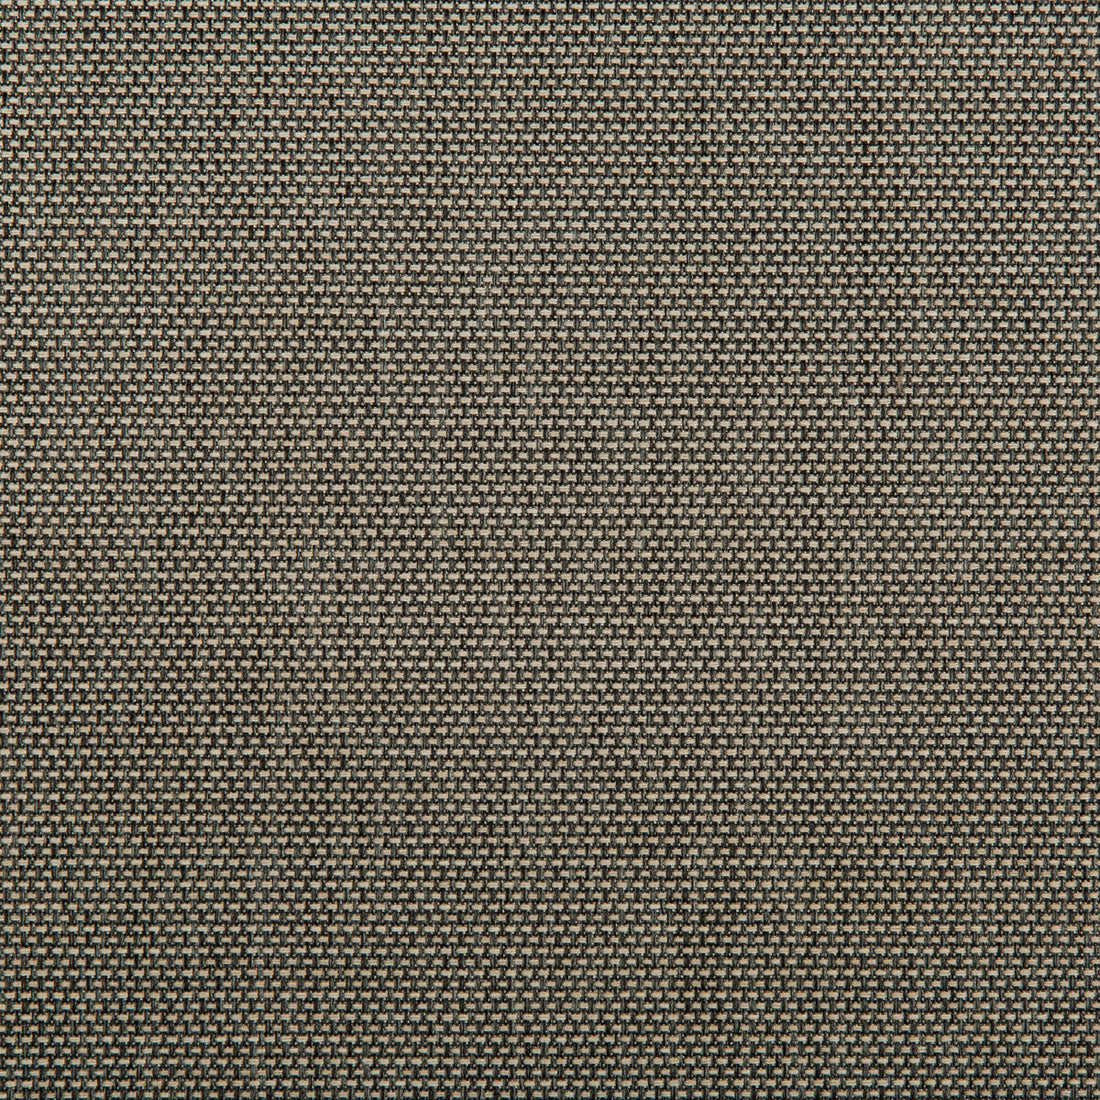 Kravet Contract fabric in 4645-1621 color - pattern 4645.1621.0 - by Kravet Contract